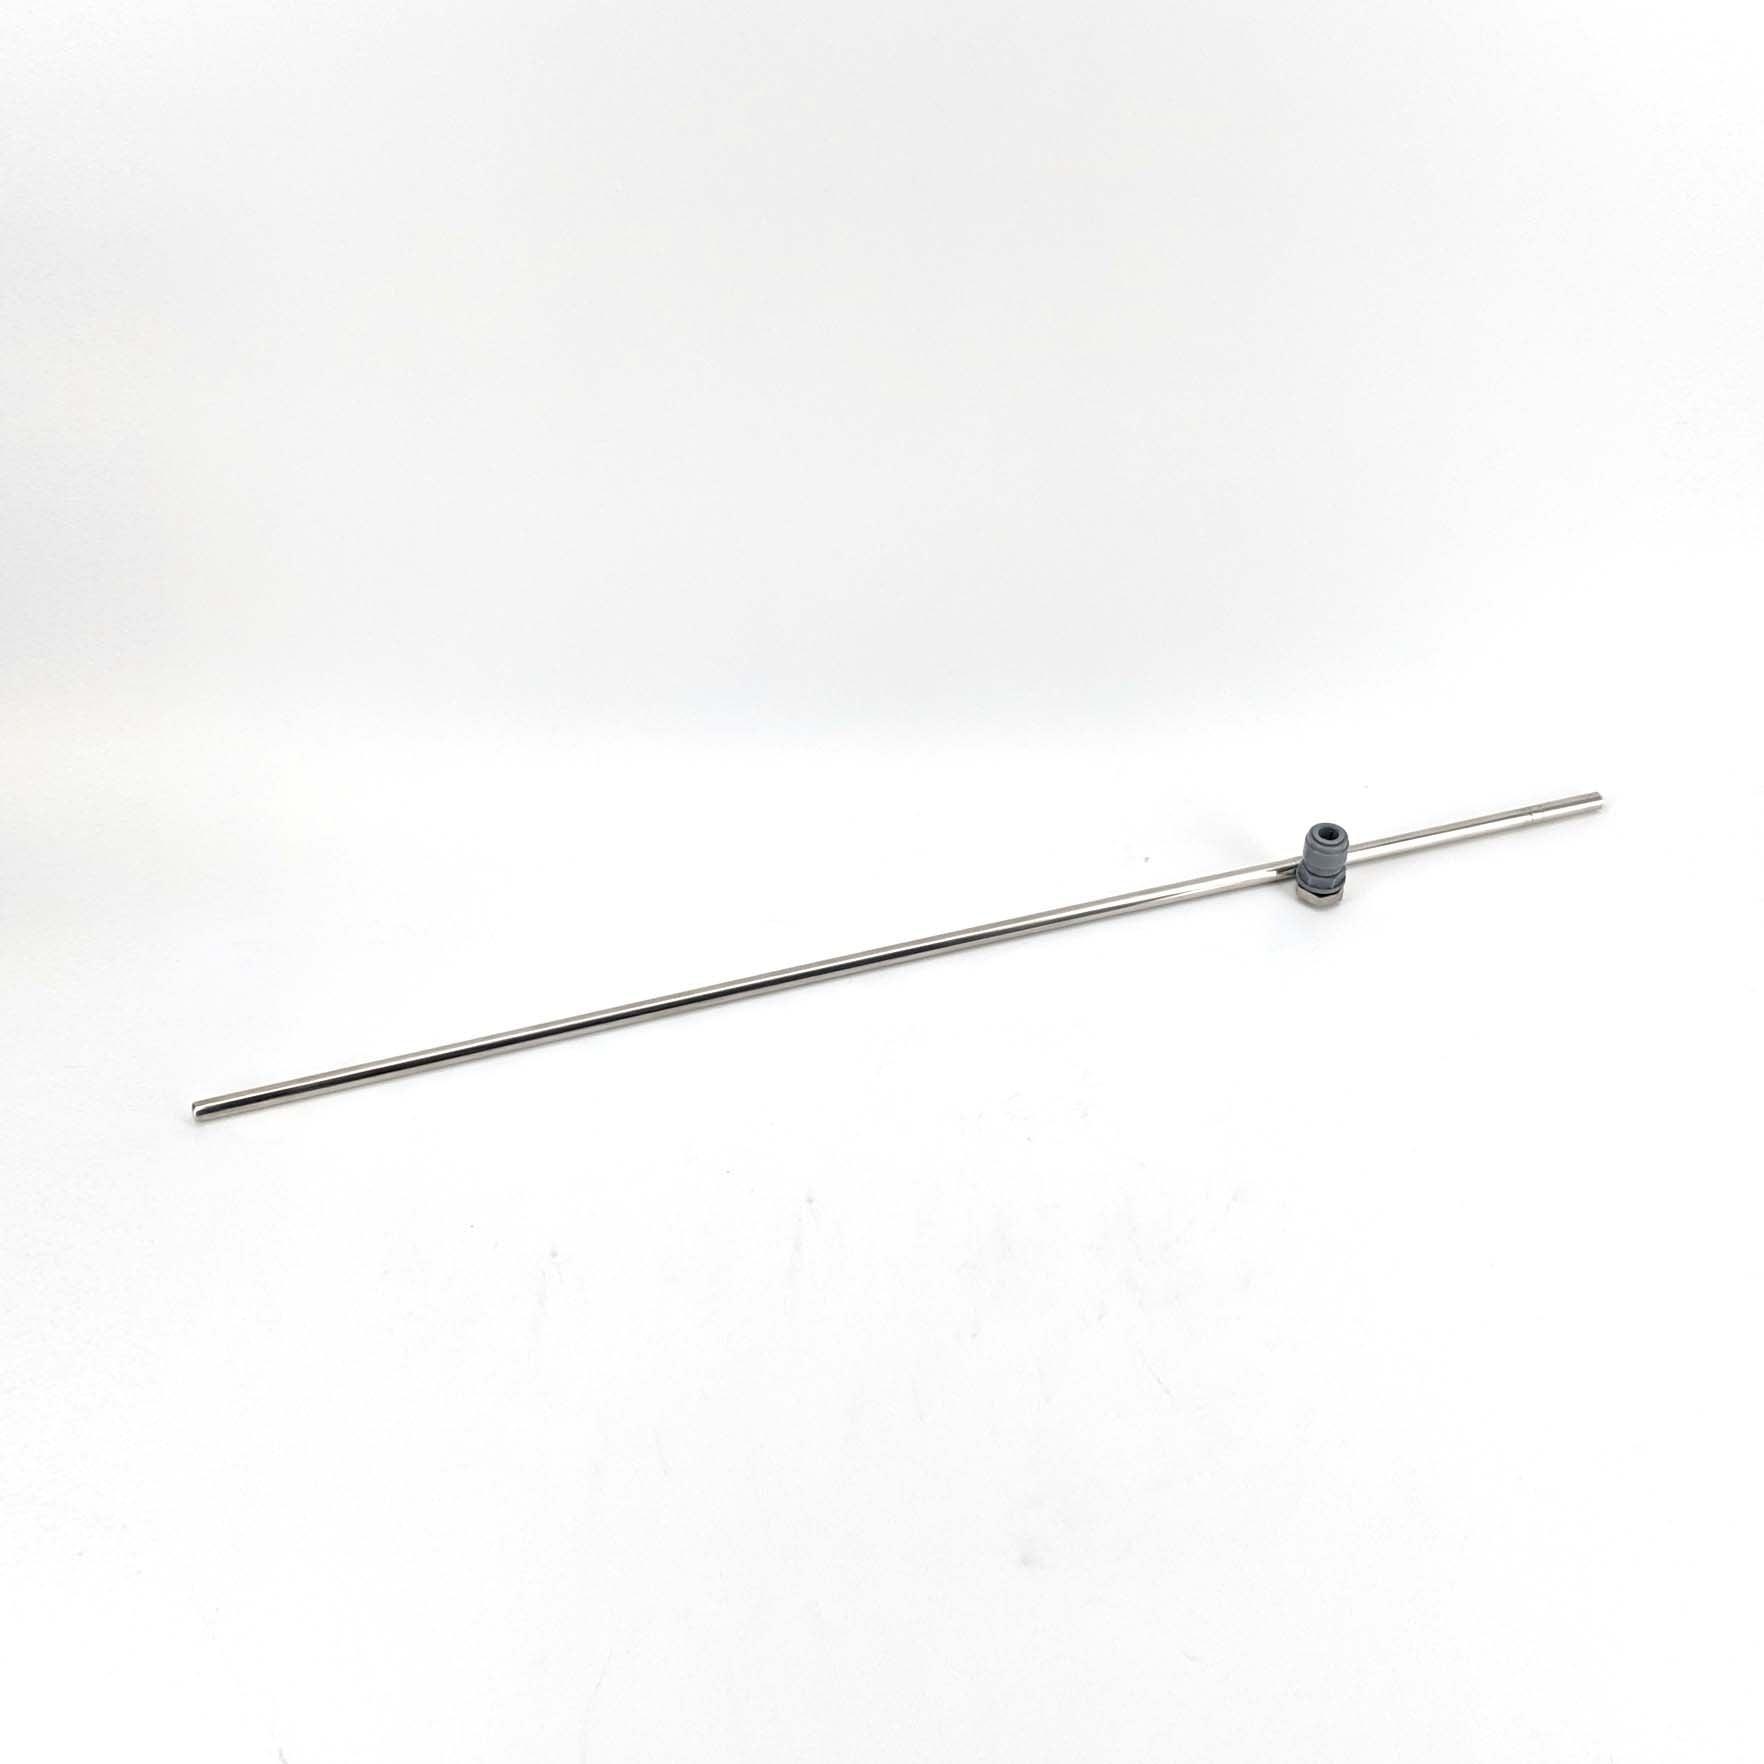 60cm Thermowell (8mm(5/16') OD) Includes duotight 8mm (5/16') x 1/4inch thread with o-ring and nut - KegLand